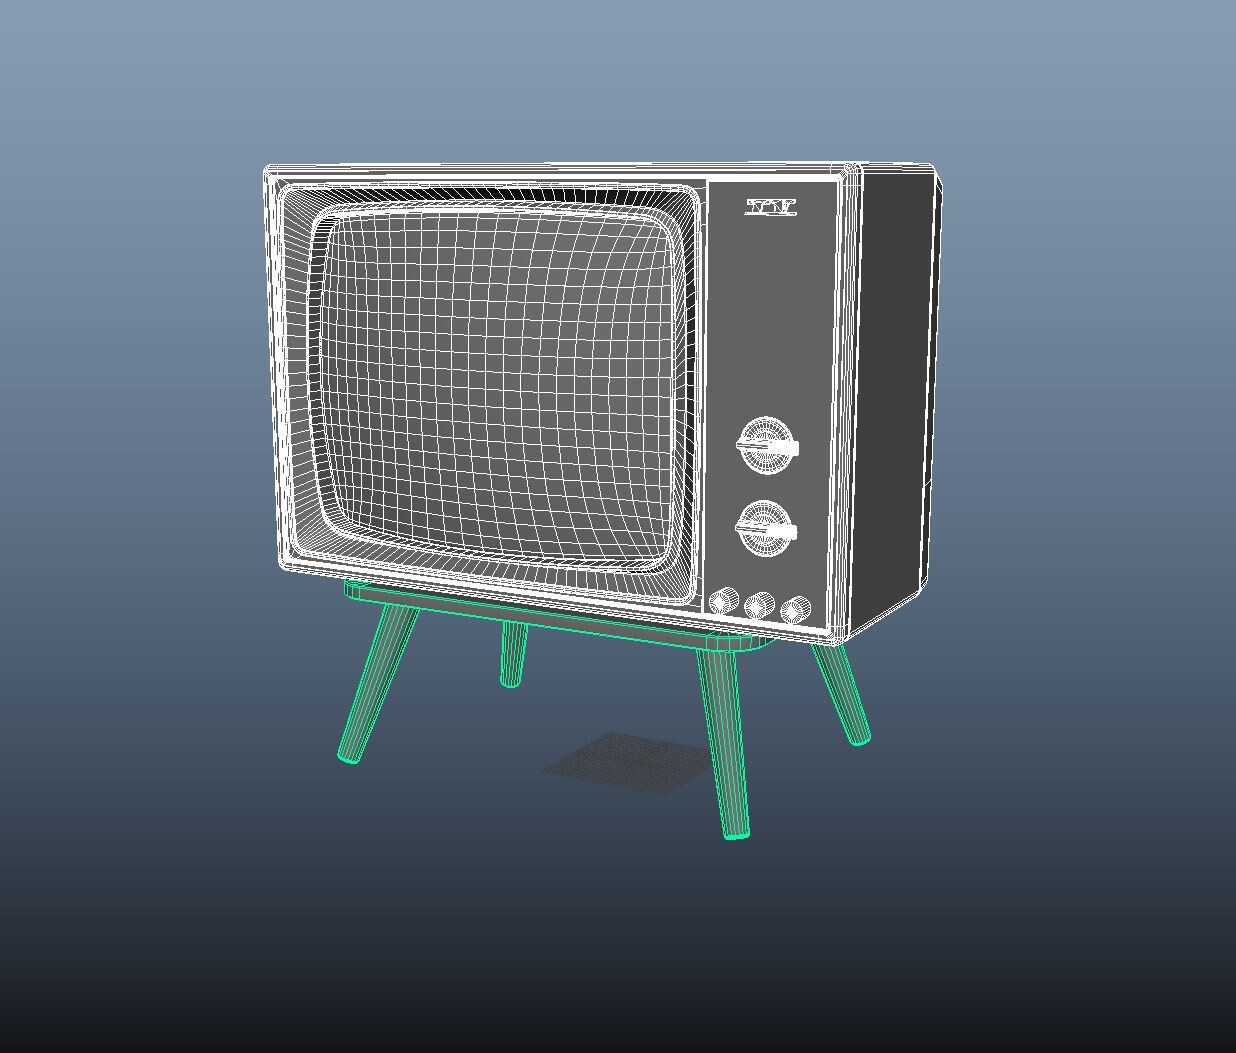 ArtStation - Old television box low poly for game.